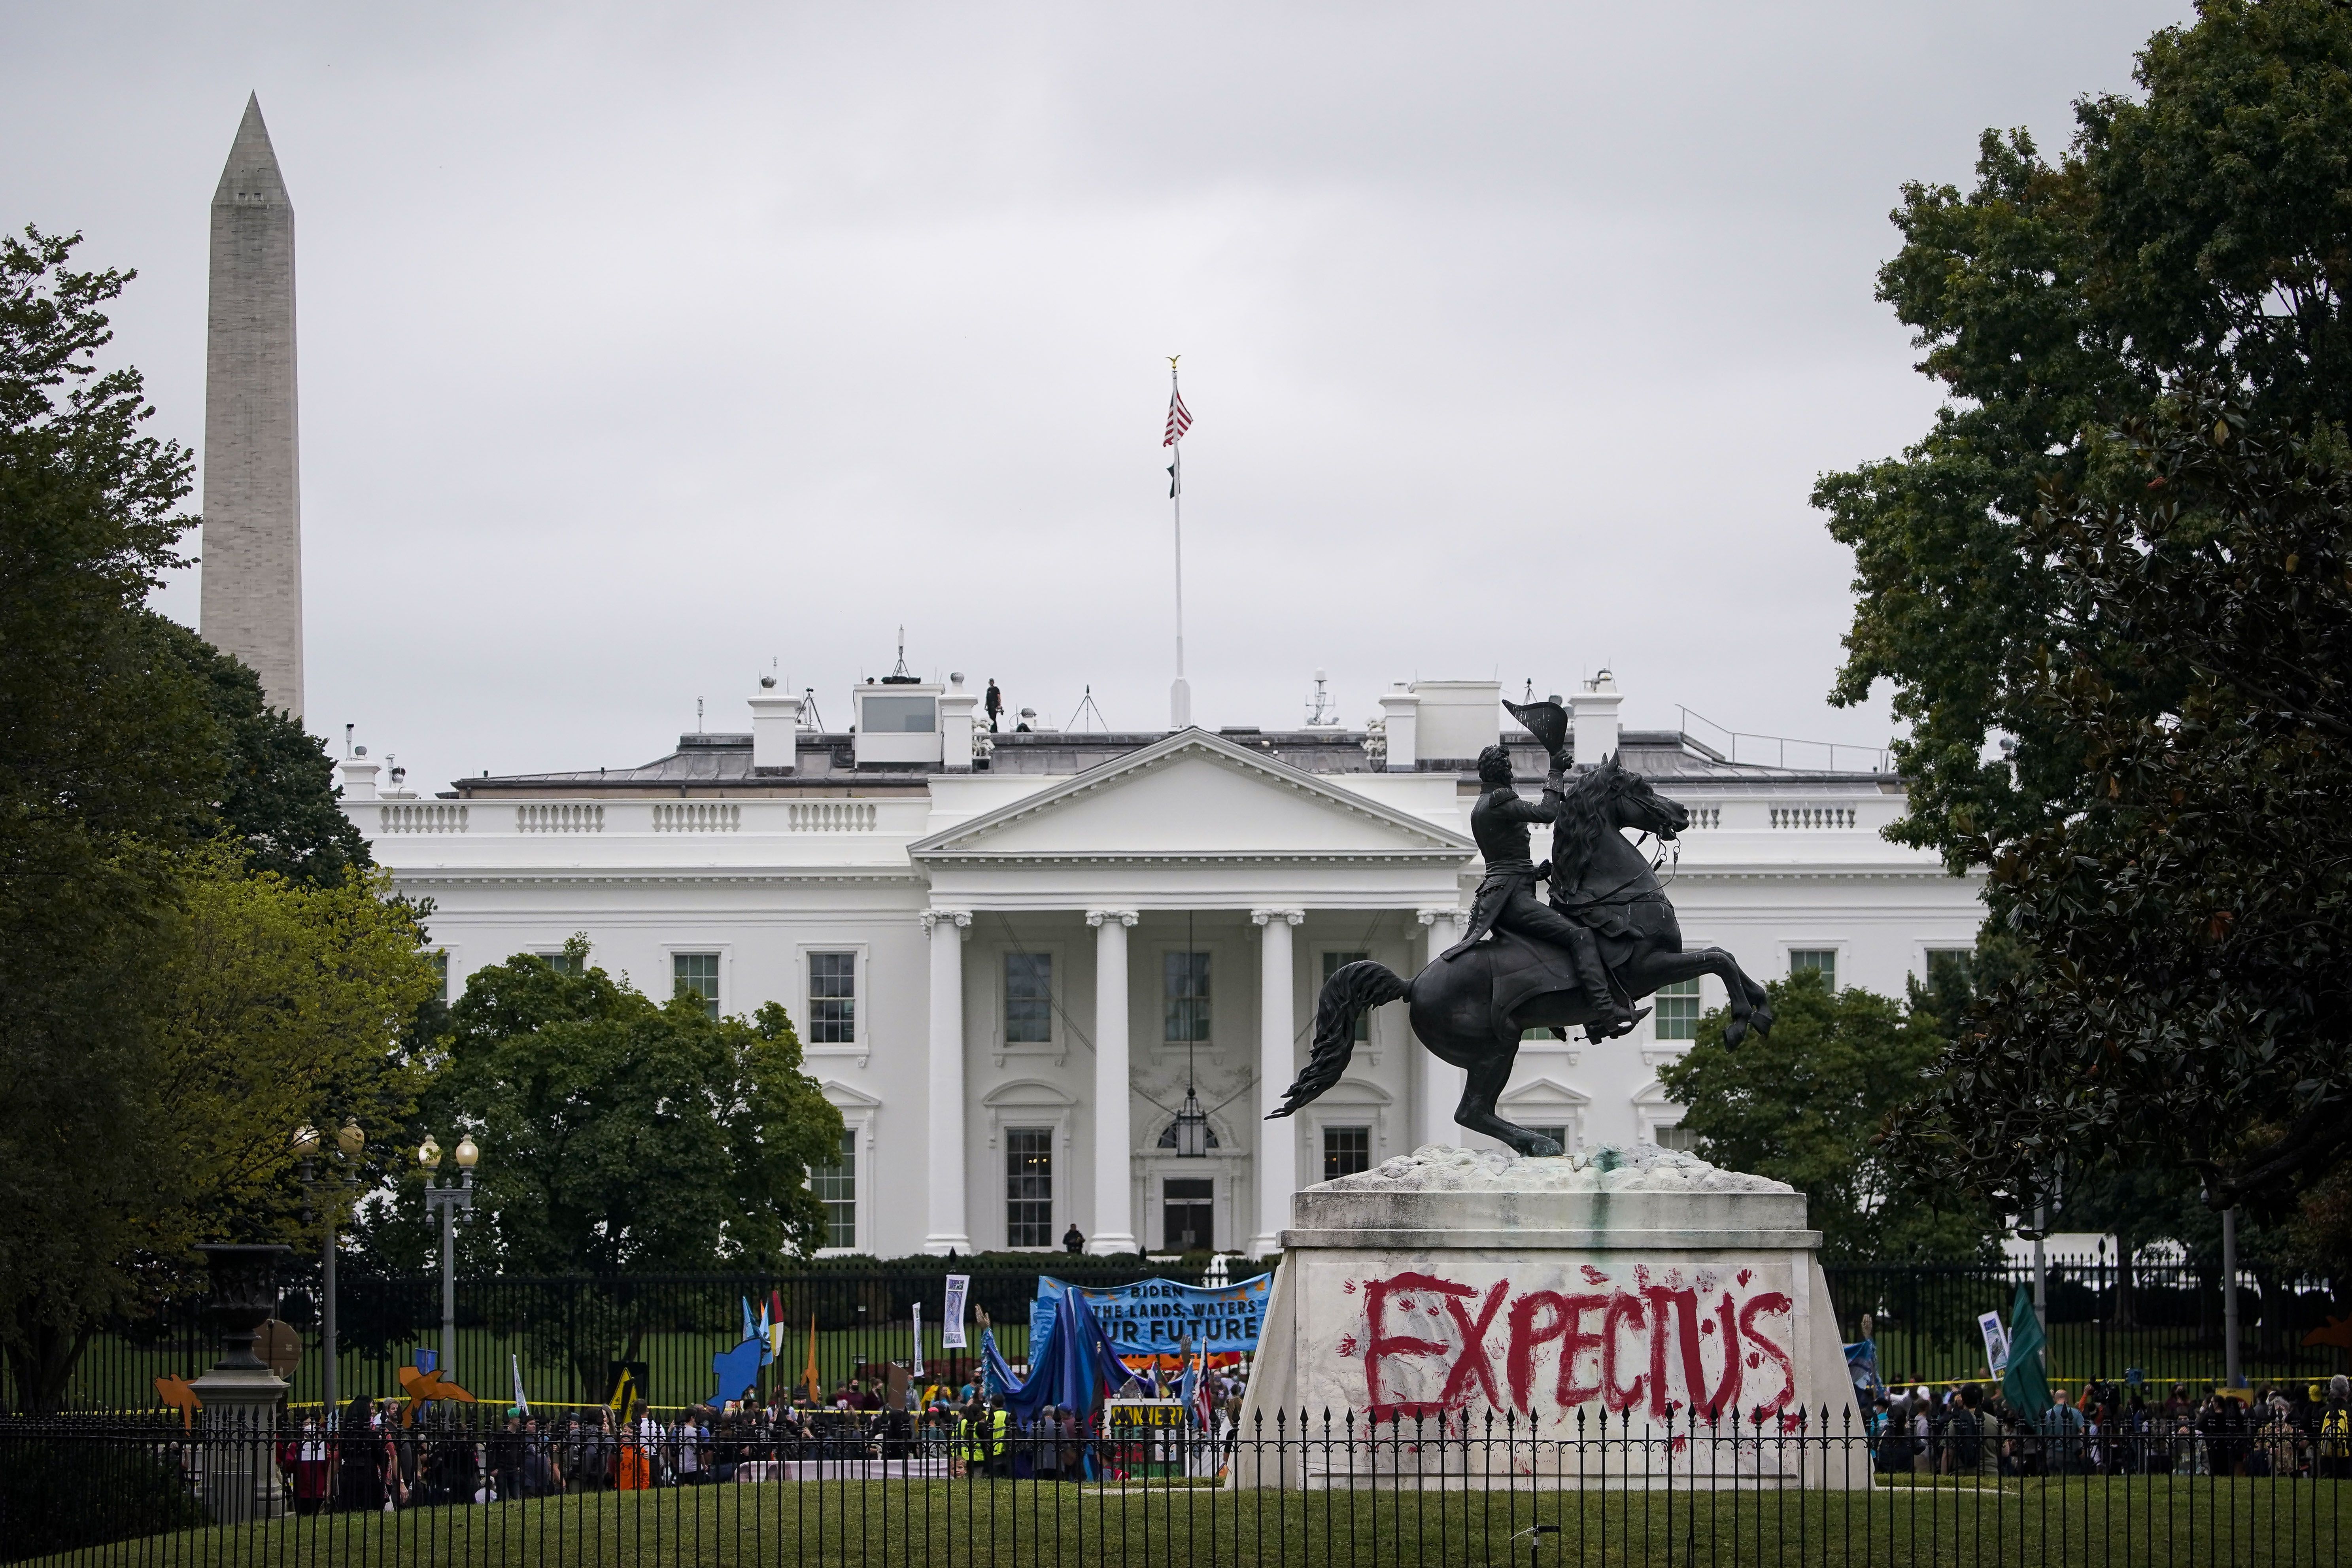 "Expect Us" painted on a statue of U.S. President Andrew Jackson outside the White House